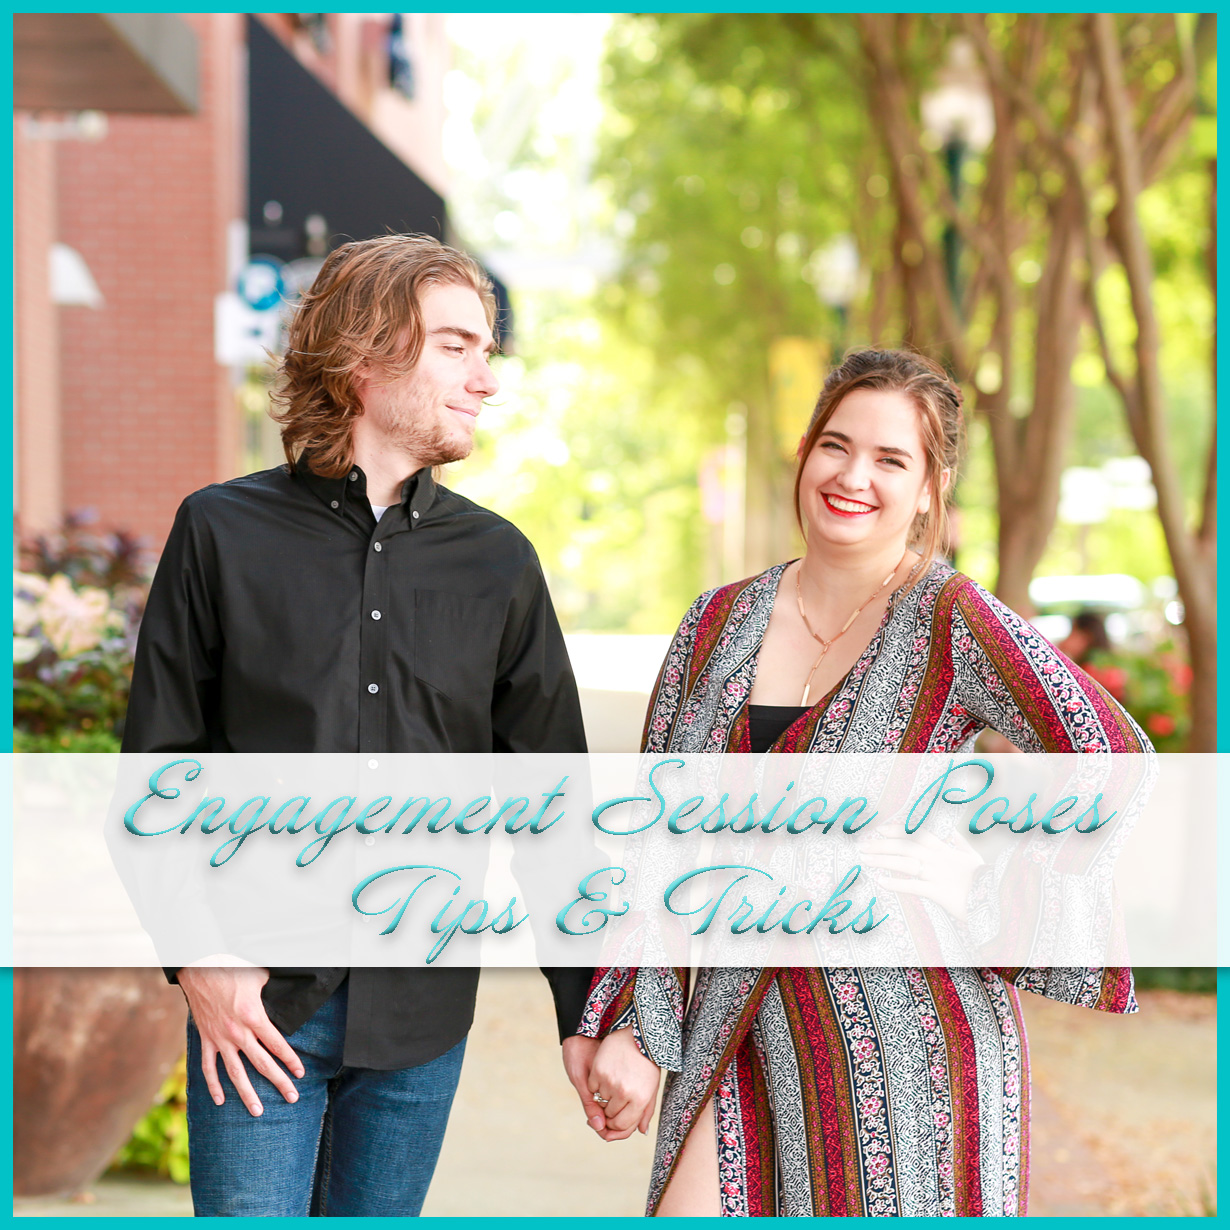 The Best Outfits for Engagement Photos | bouldercreekphotography.com